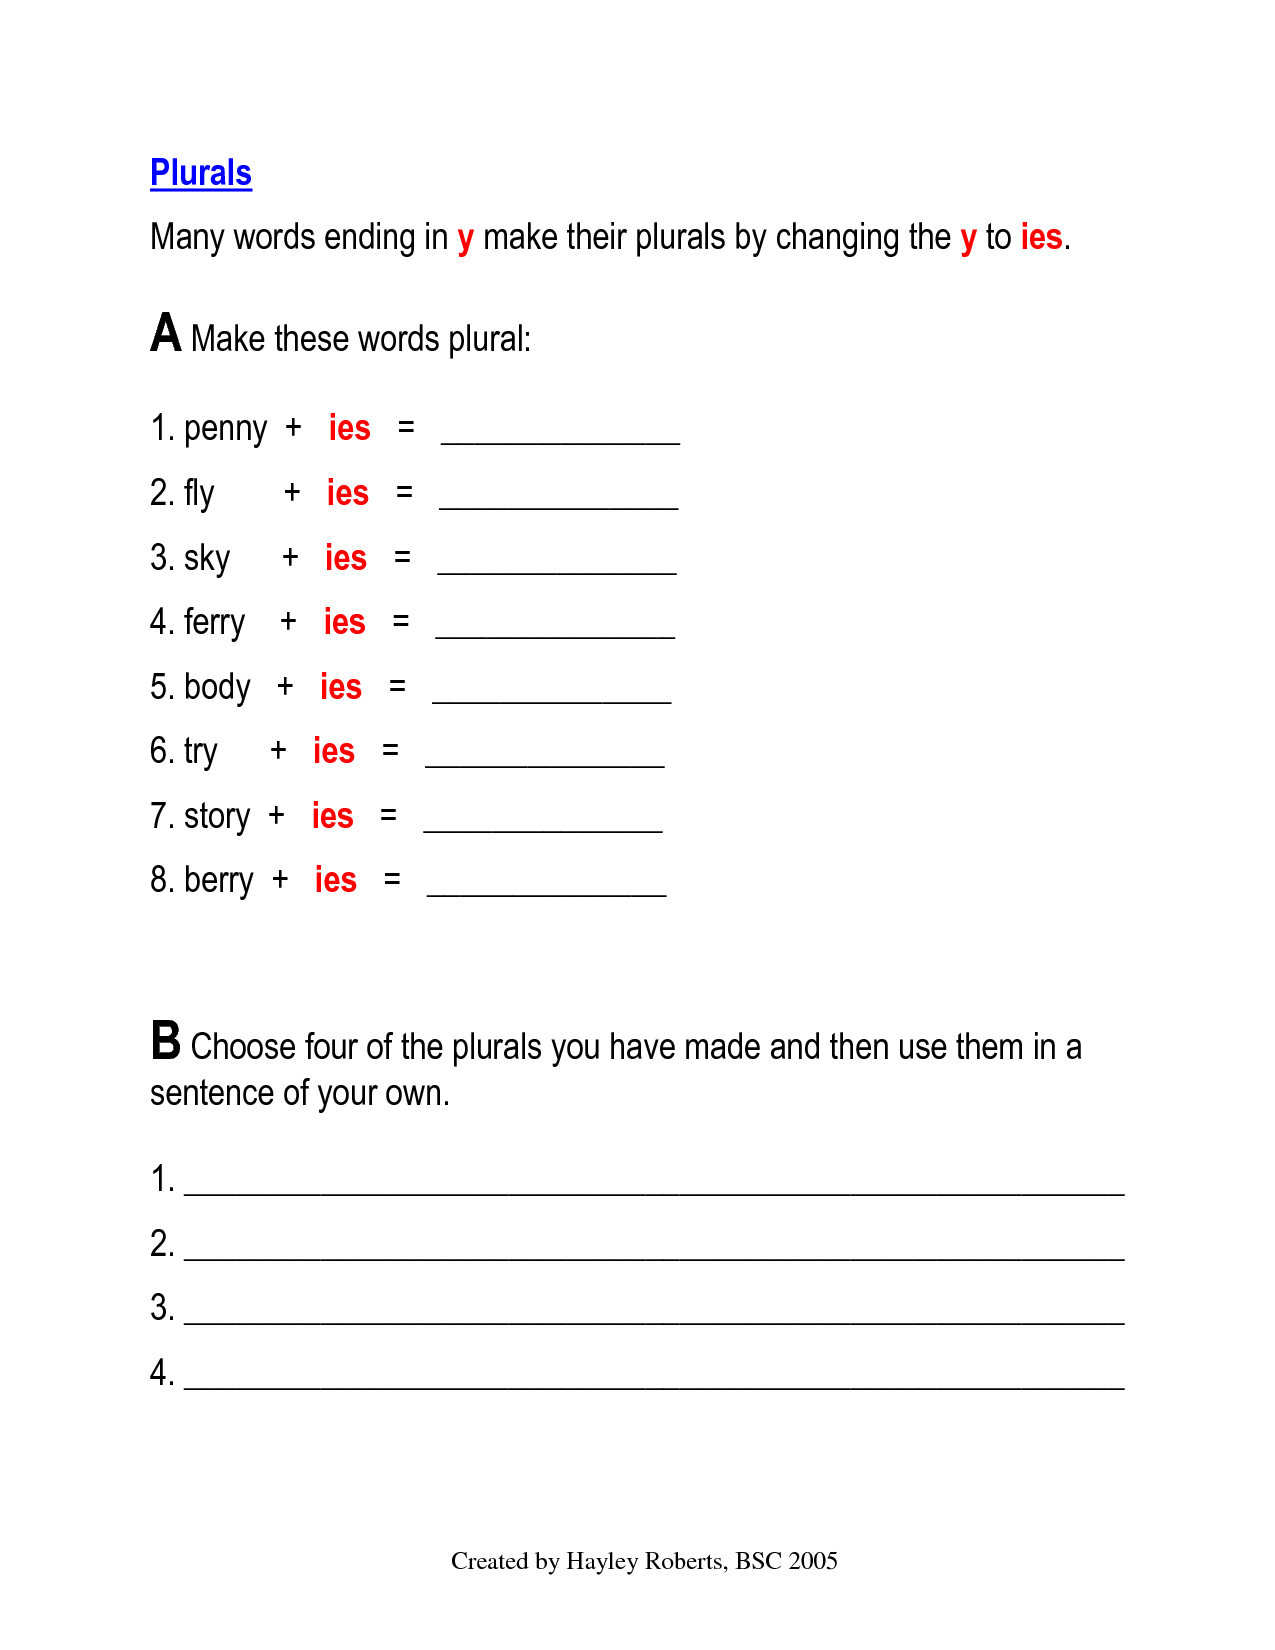 19 Best Images Of Adding Ed To Words Worksheets Adding Ed And ING To Words Worksheets Adding